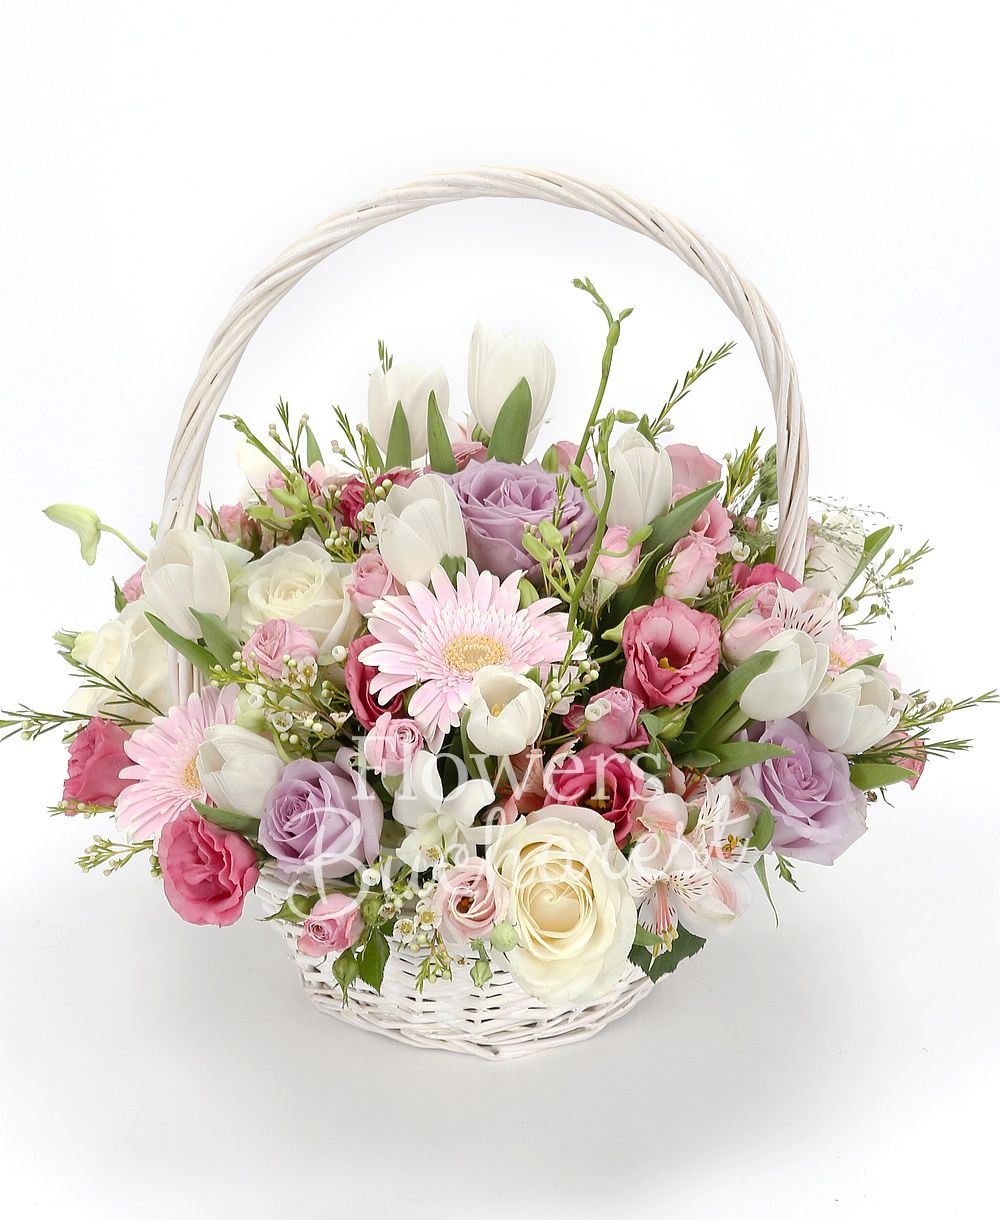 5 pink alstroemeria, 10 white tulips, 5 pink gerbera, 5 mauve roses, 5 white roses, 5 pink lisianthus, 5 pink miniroses, 5 white dendrobium orchids, greenery